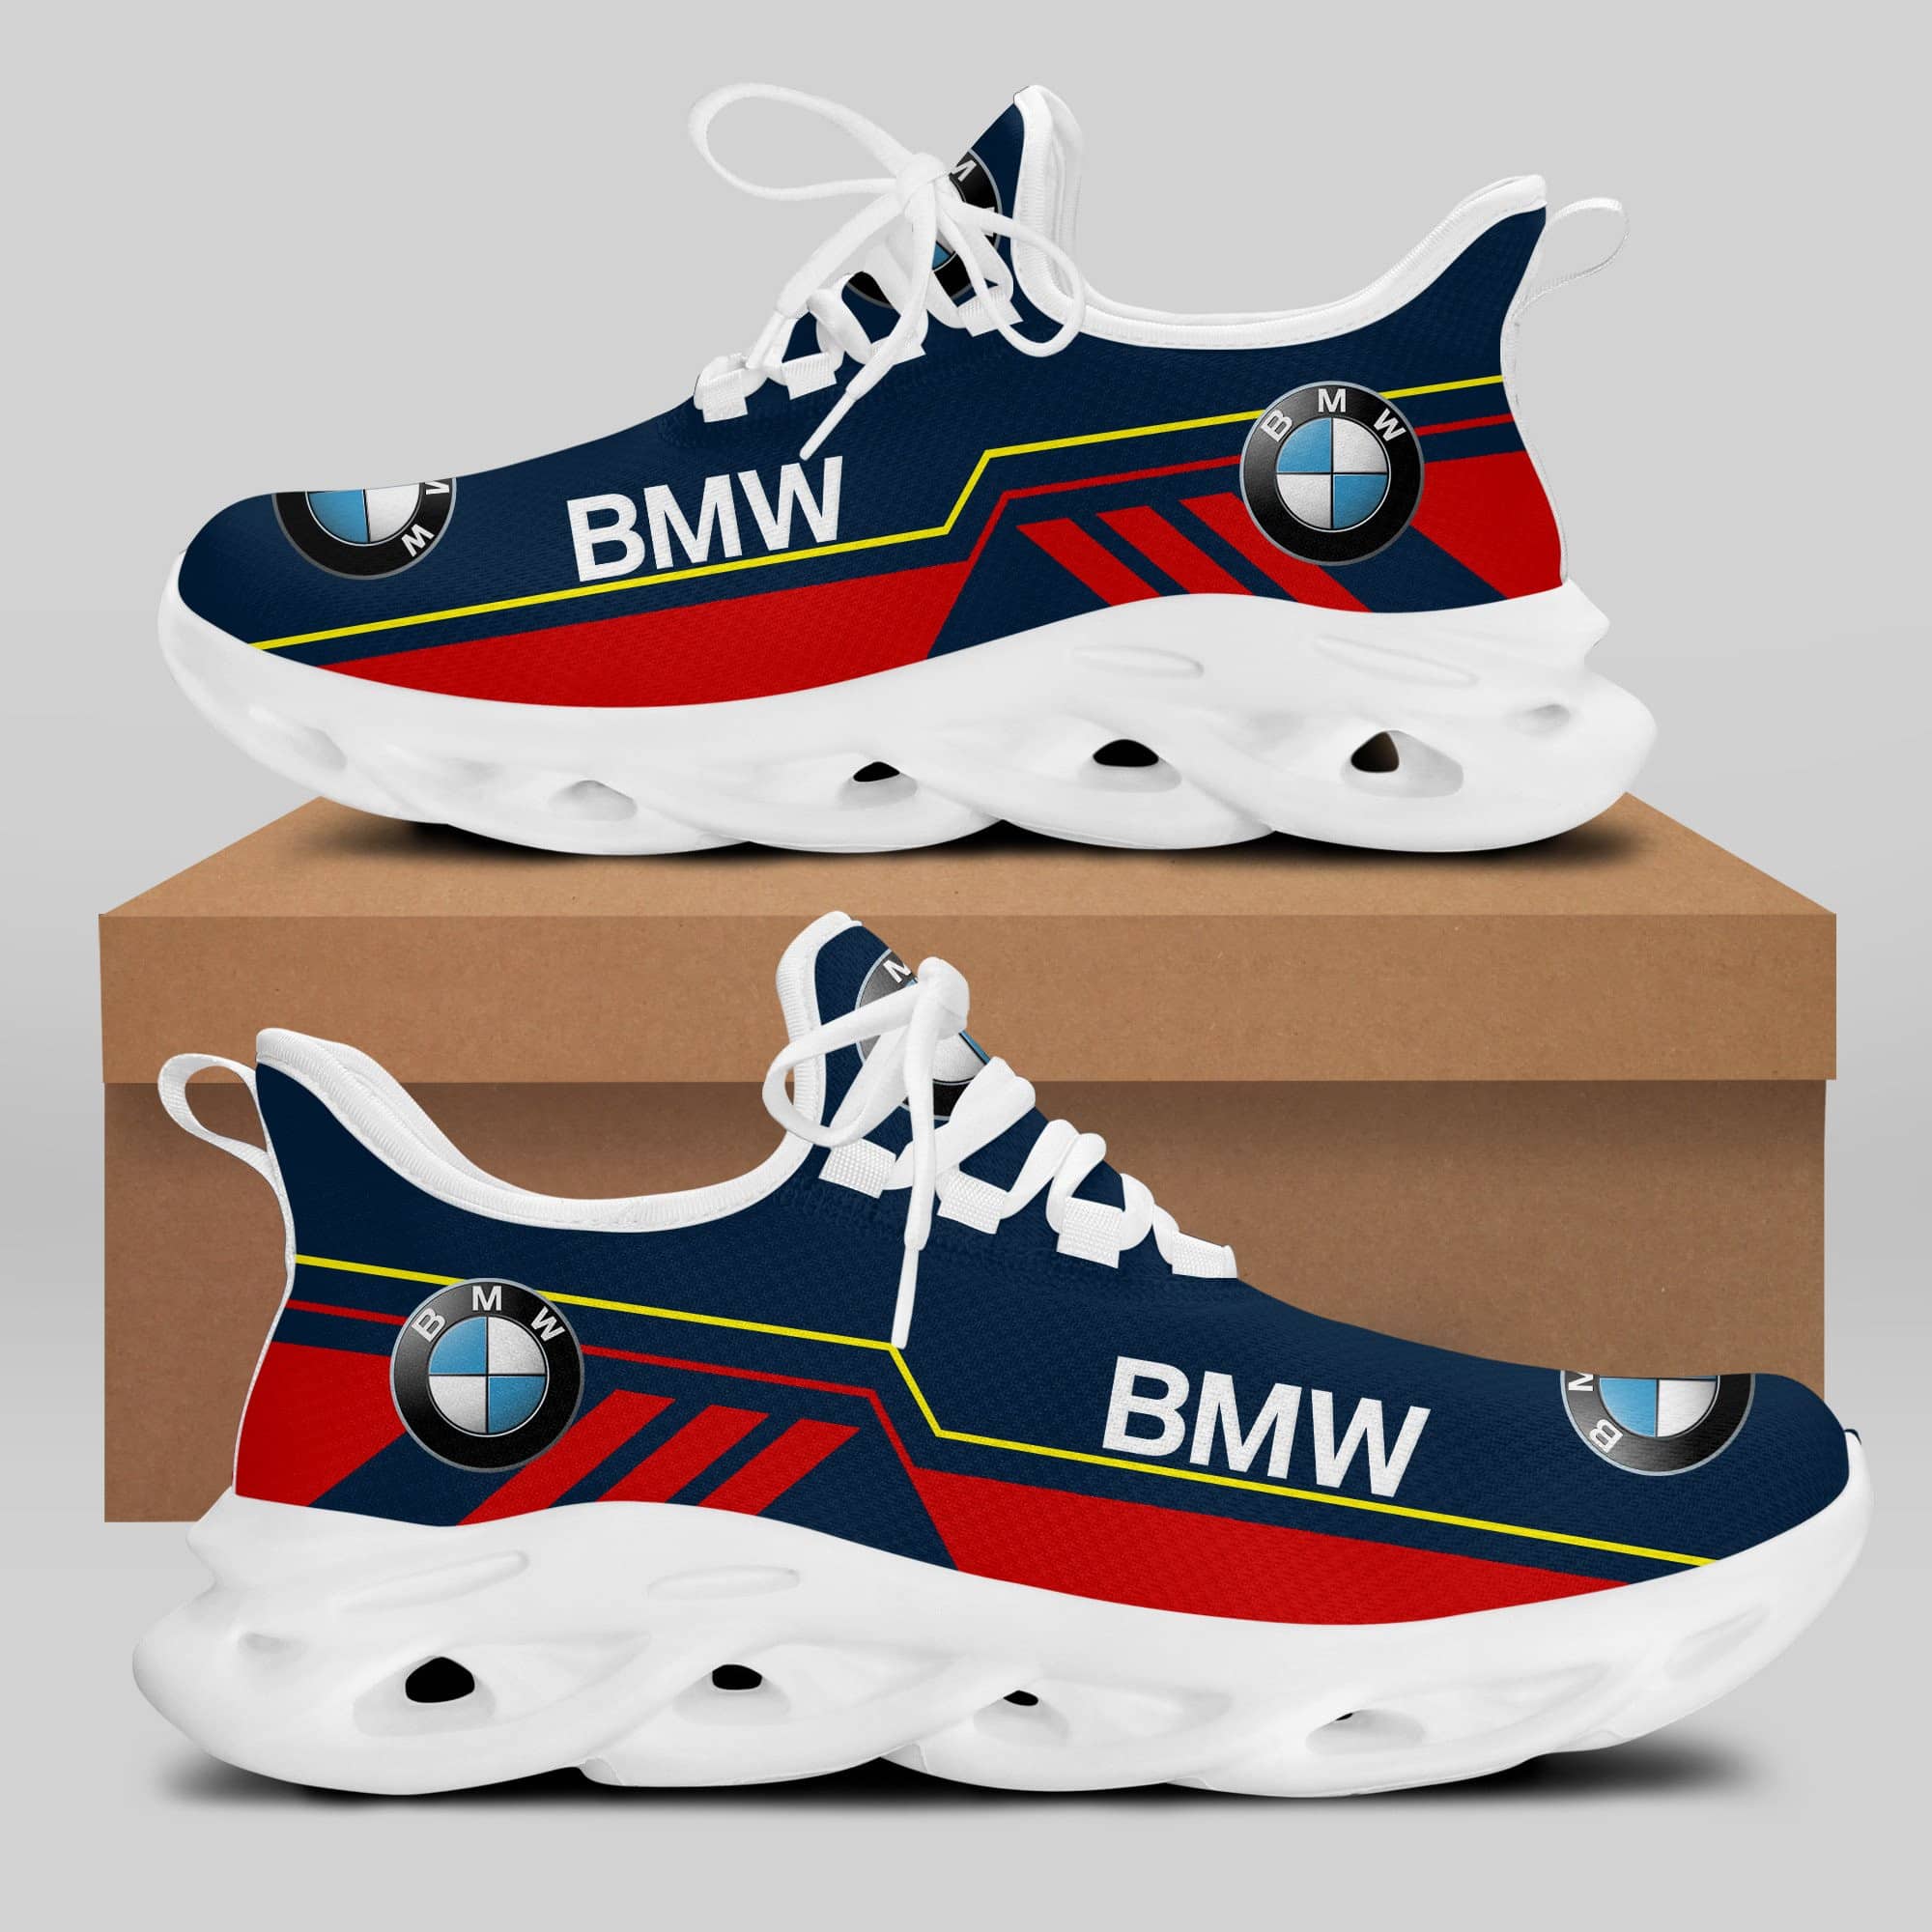 Bmw Running Shoes Max Soul Shoes Sneakers Ver 39 2